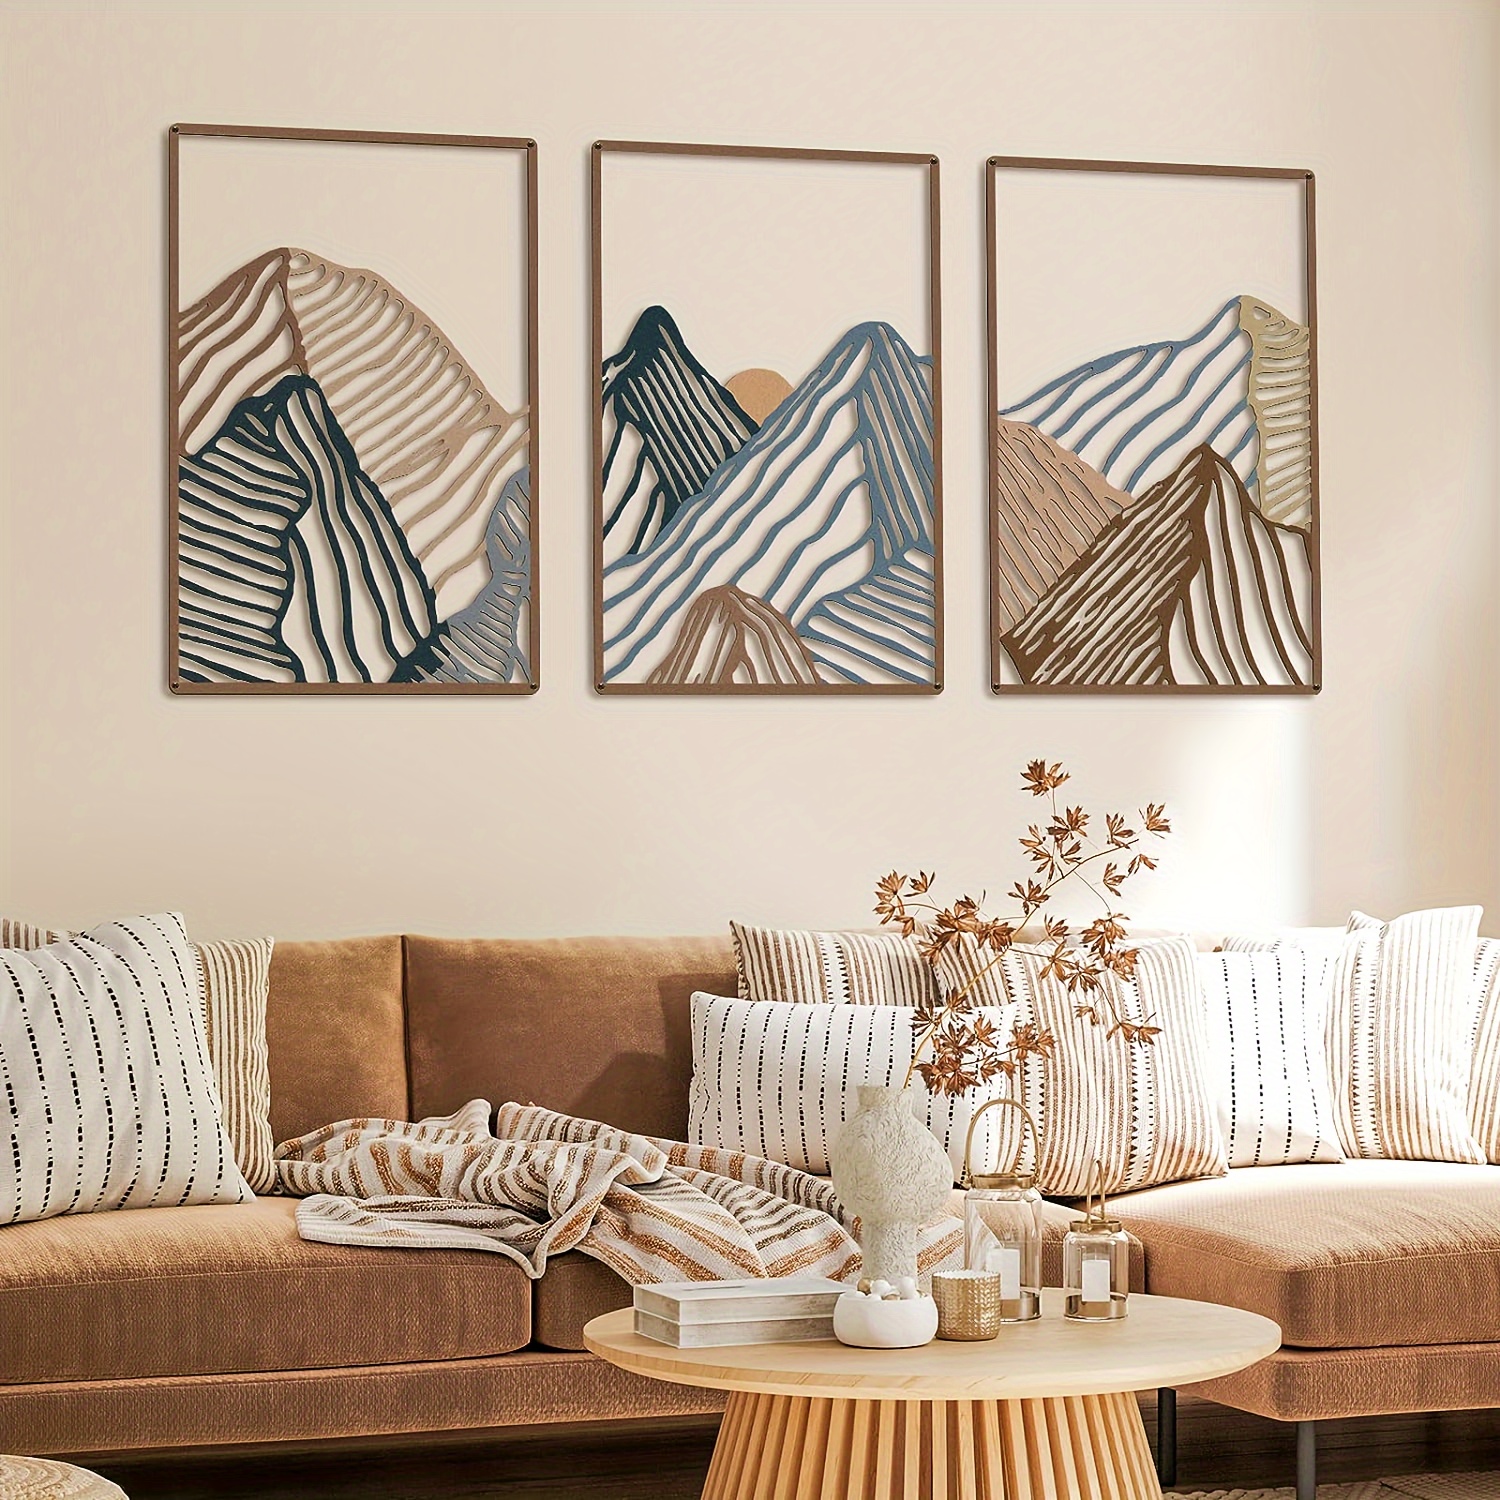 

3pcs/aet Minimalist Mountain Landscape Metal Wall Art, Square Hollow-out Panels, Modern Home Decor For Living Room, Bedroom, Office, Sunset Artistic Hanging Decor, Room Decor